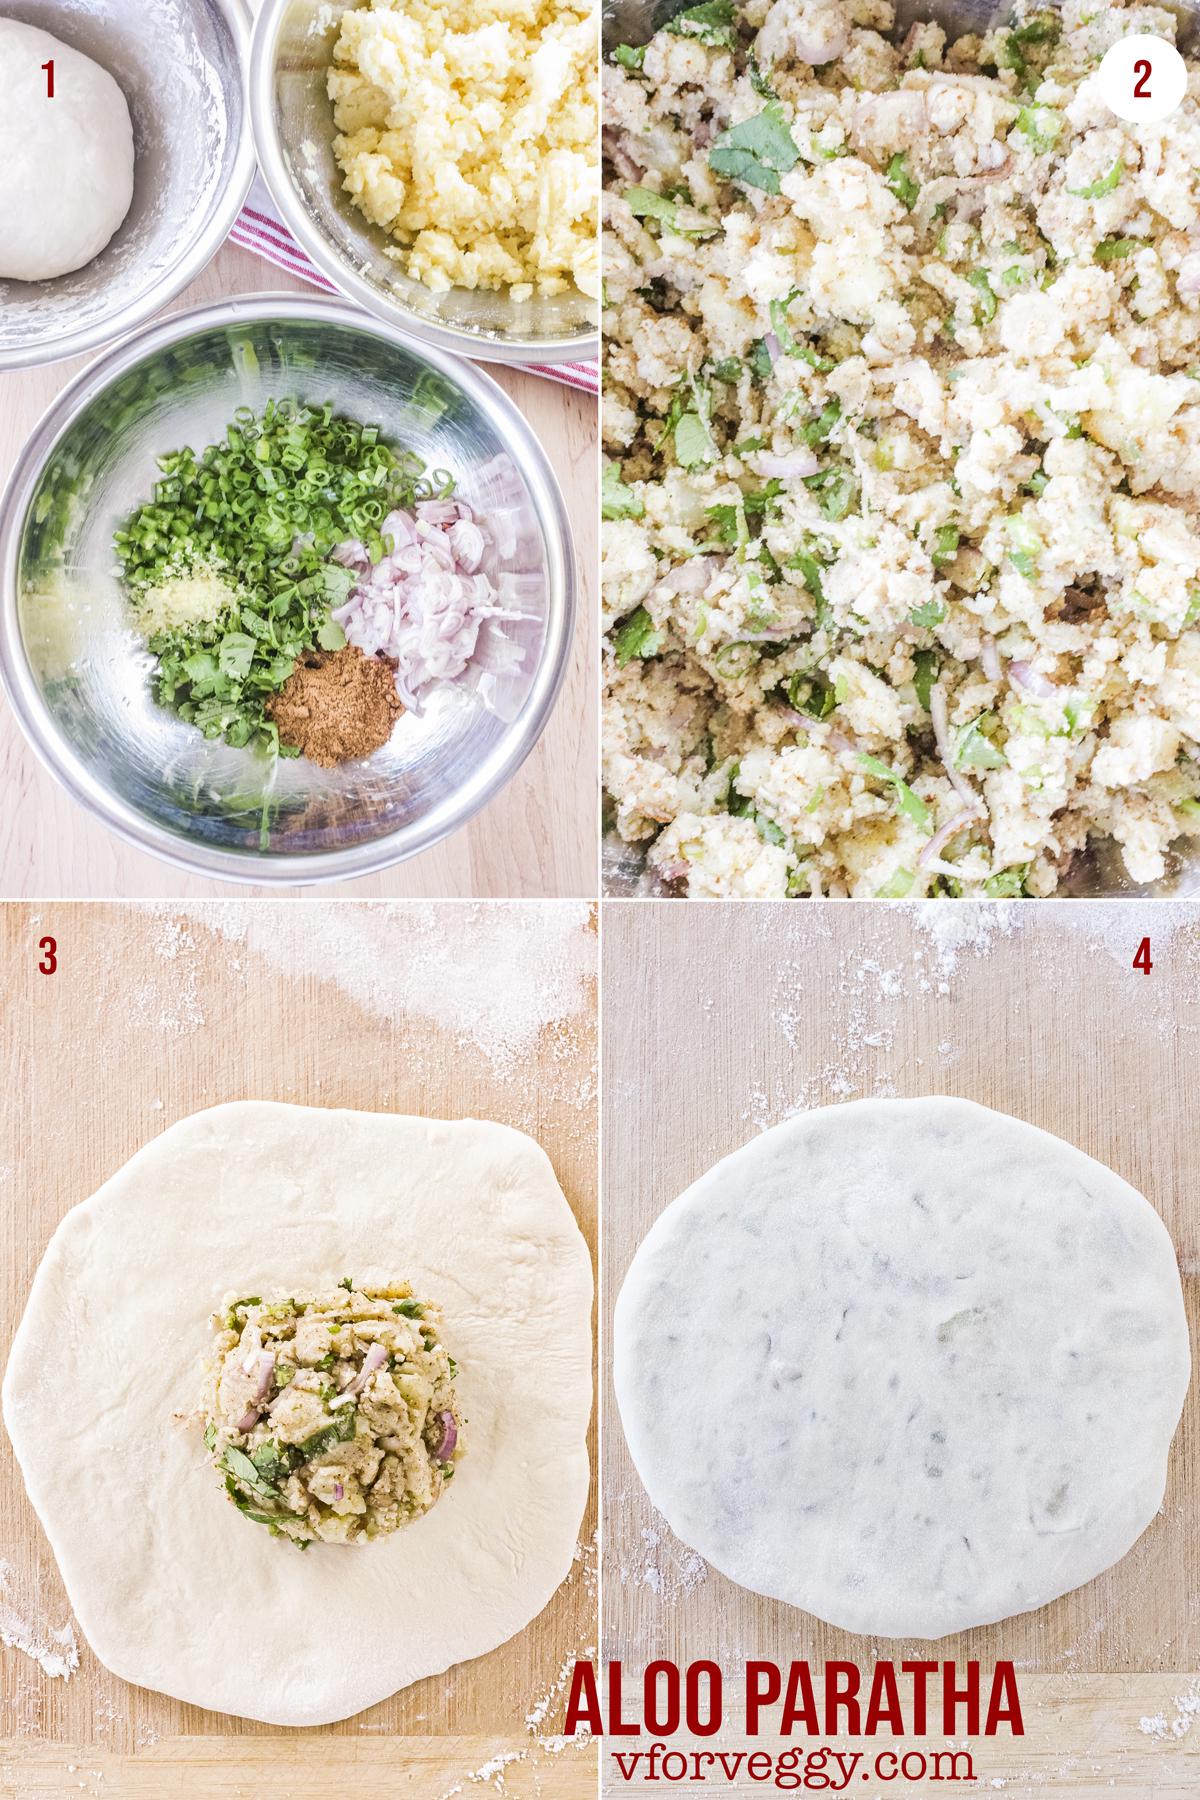 (1) Ingredients for aloo paratha. (2) Potato mixture for the aloo paratha filling. (3) Place a scoop of the potato filling on a flatten piece of the dough. (4) Wrap the filling with the dough and flatten into a disc.